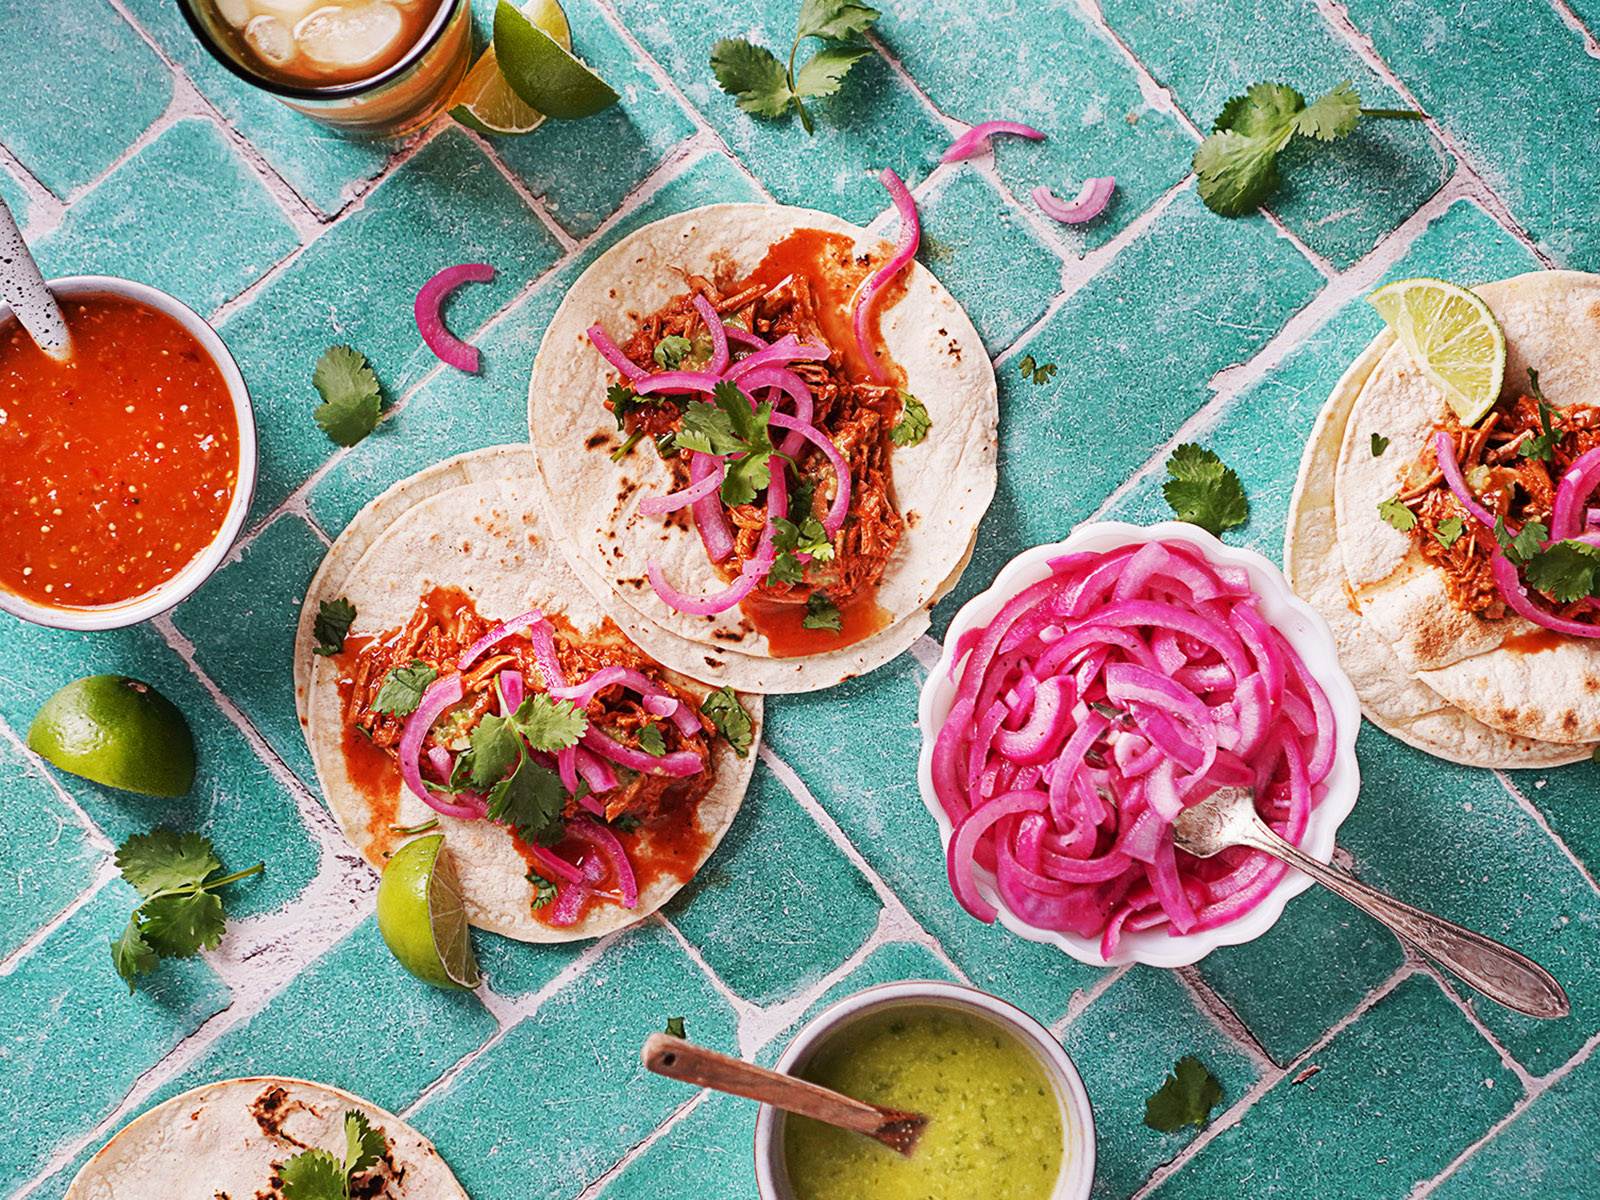 3 cochinita pibil tacos on a green title table with salsas on small bowls